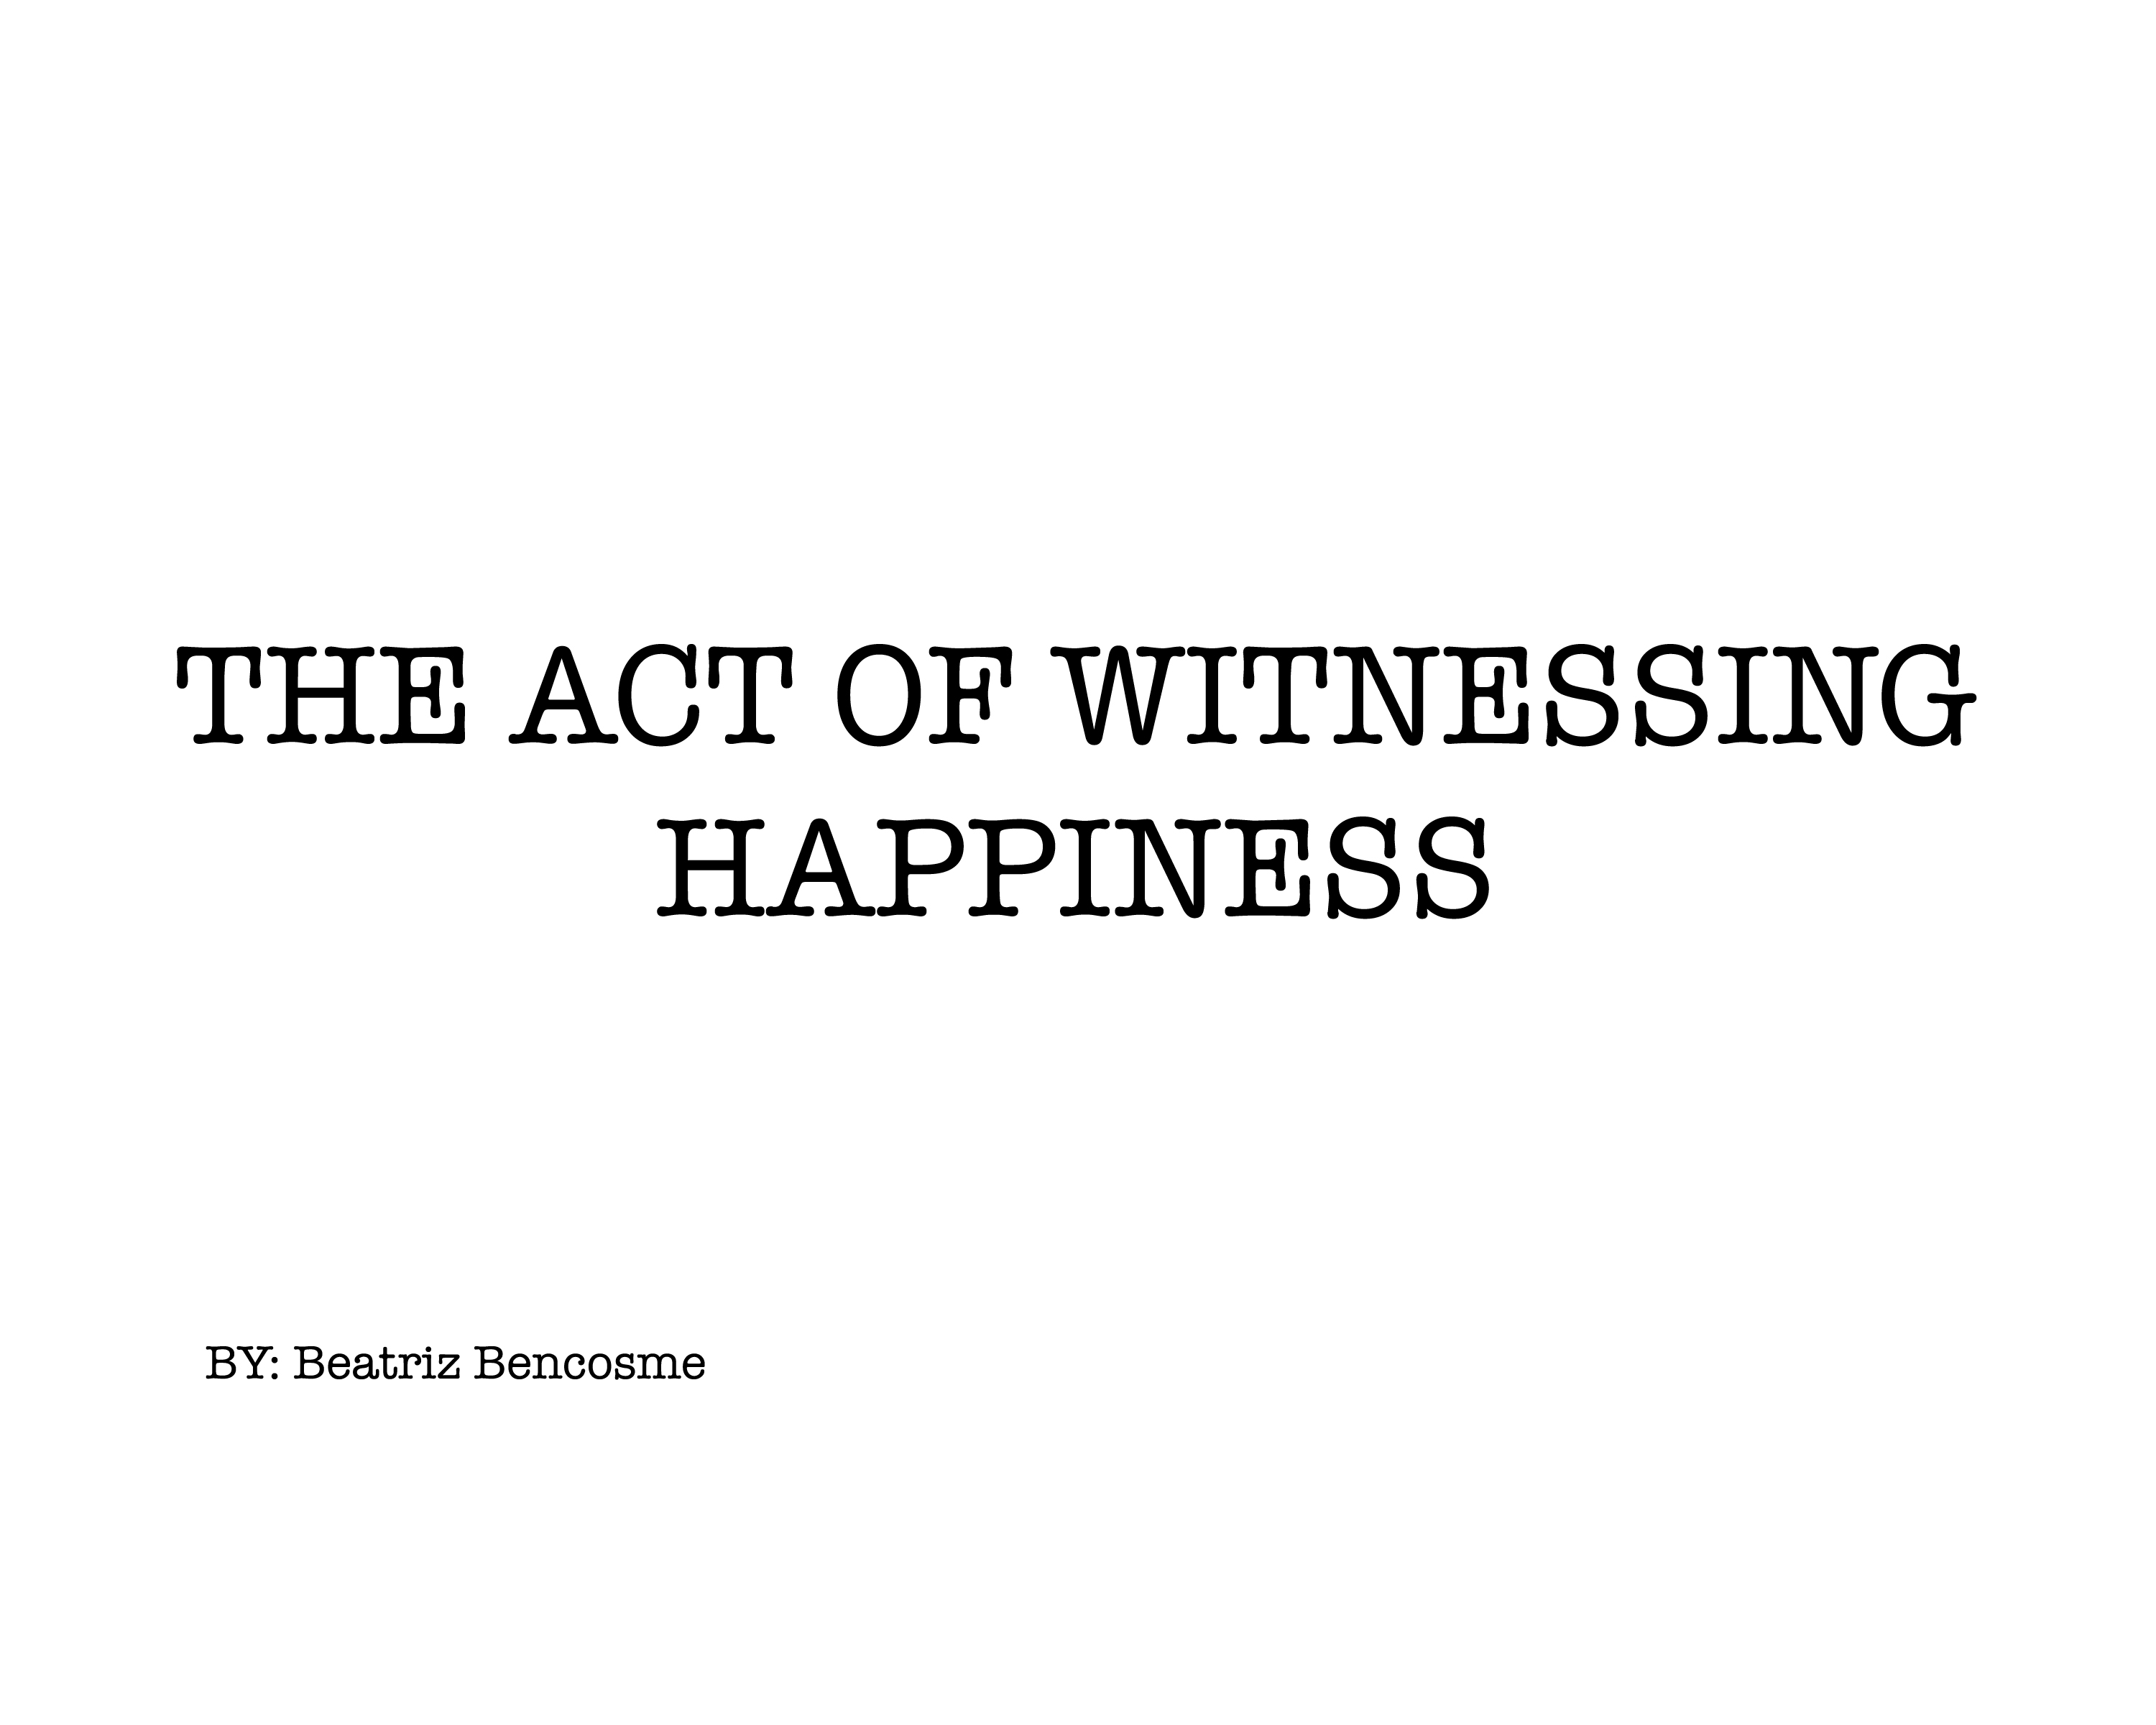 Project 2: The Act Of Witnessing Happiness